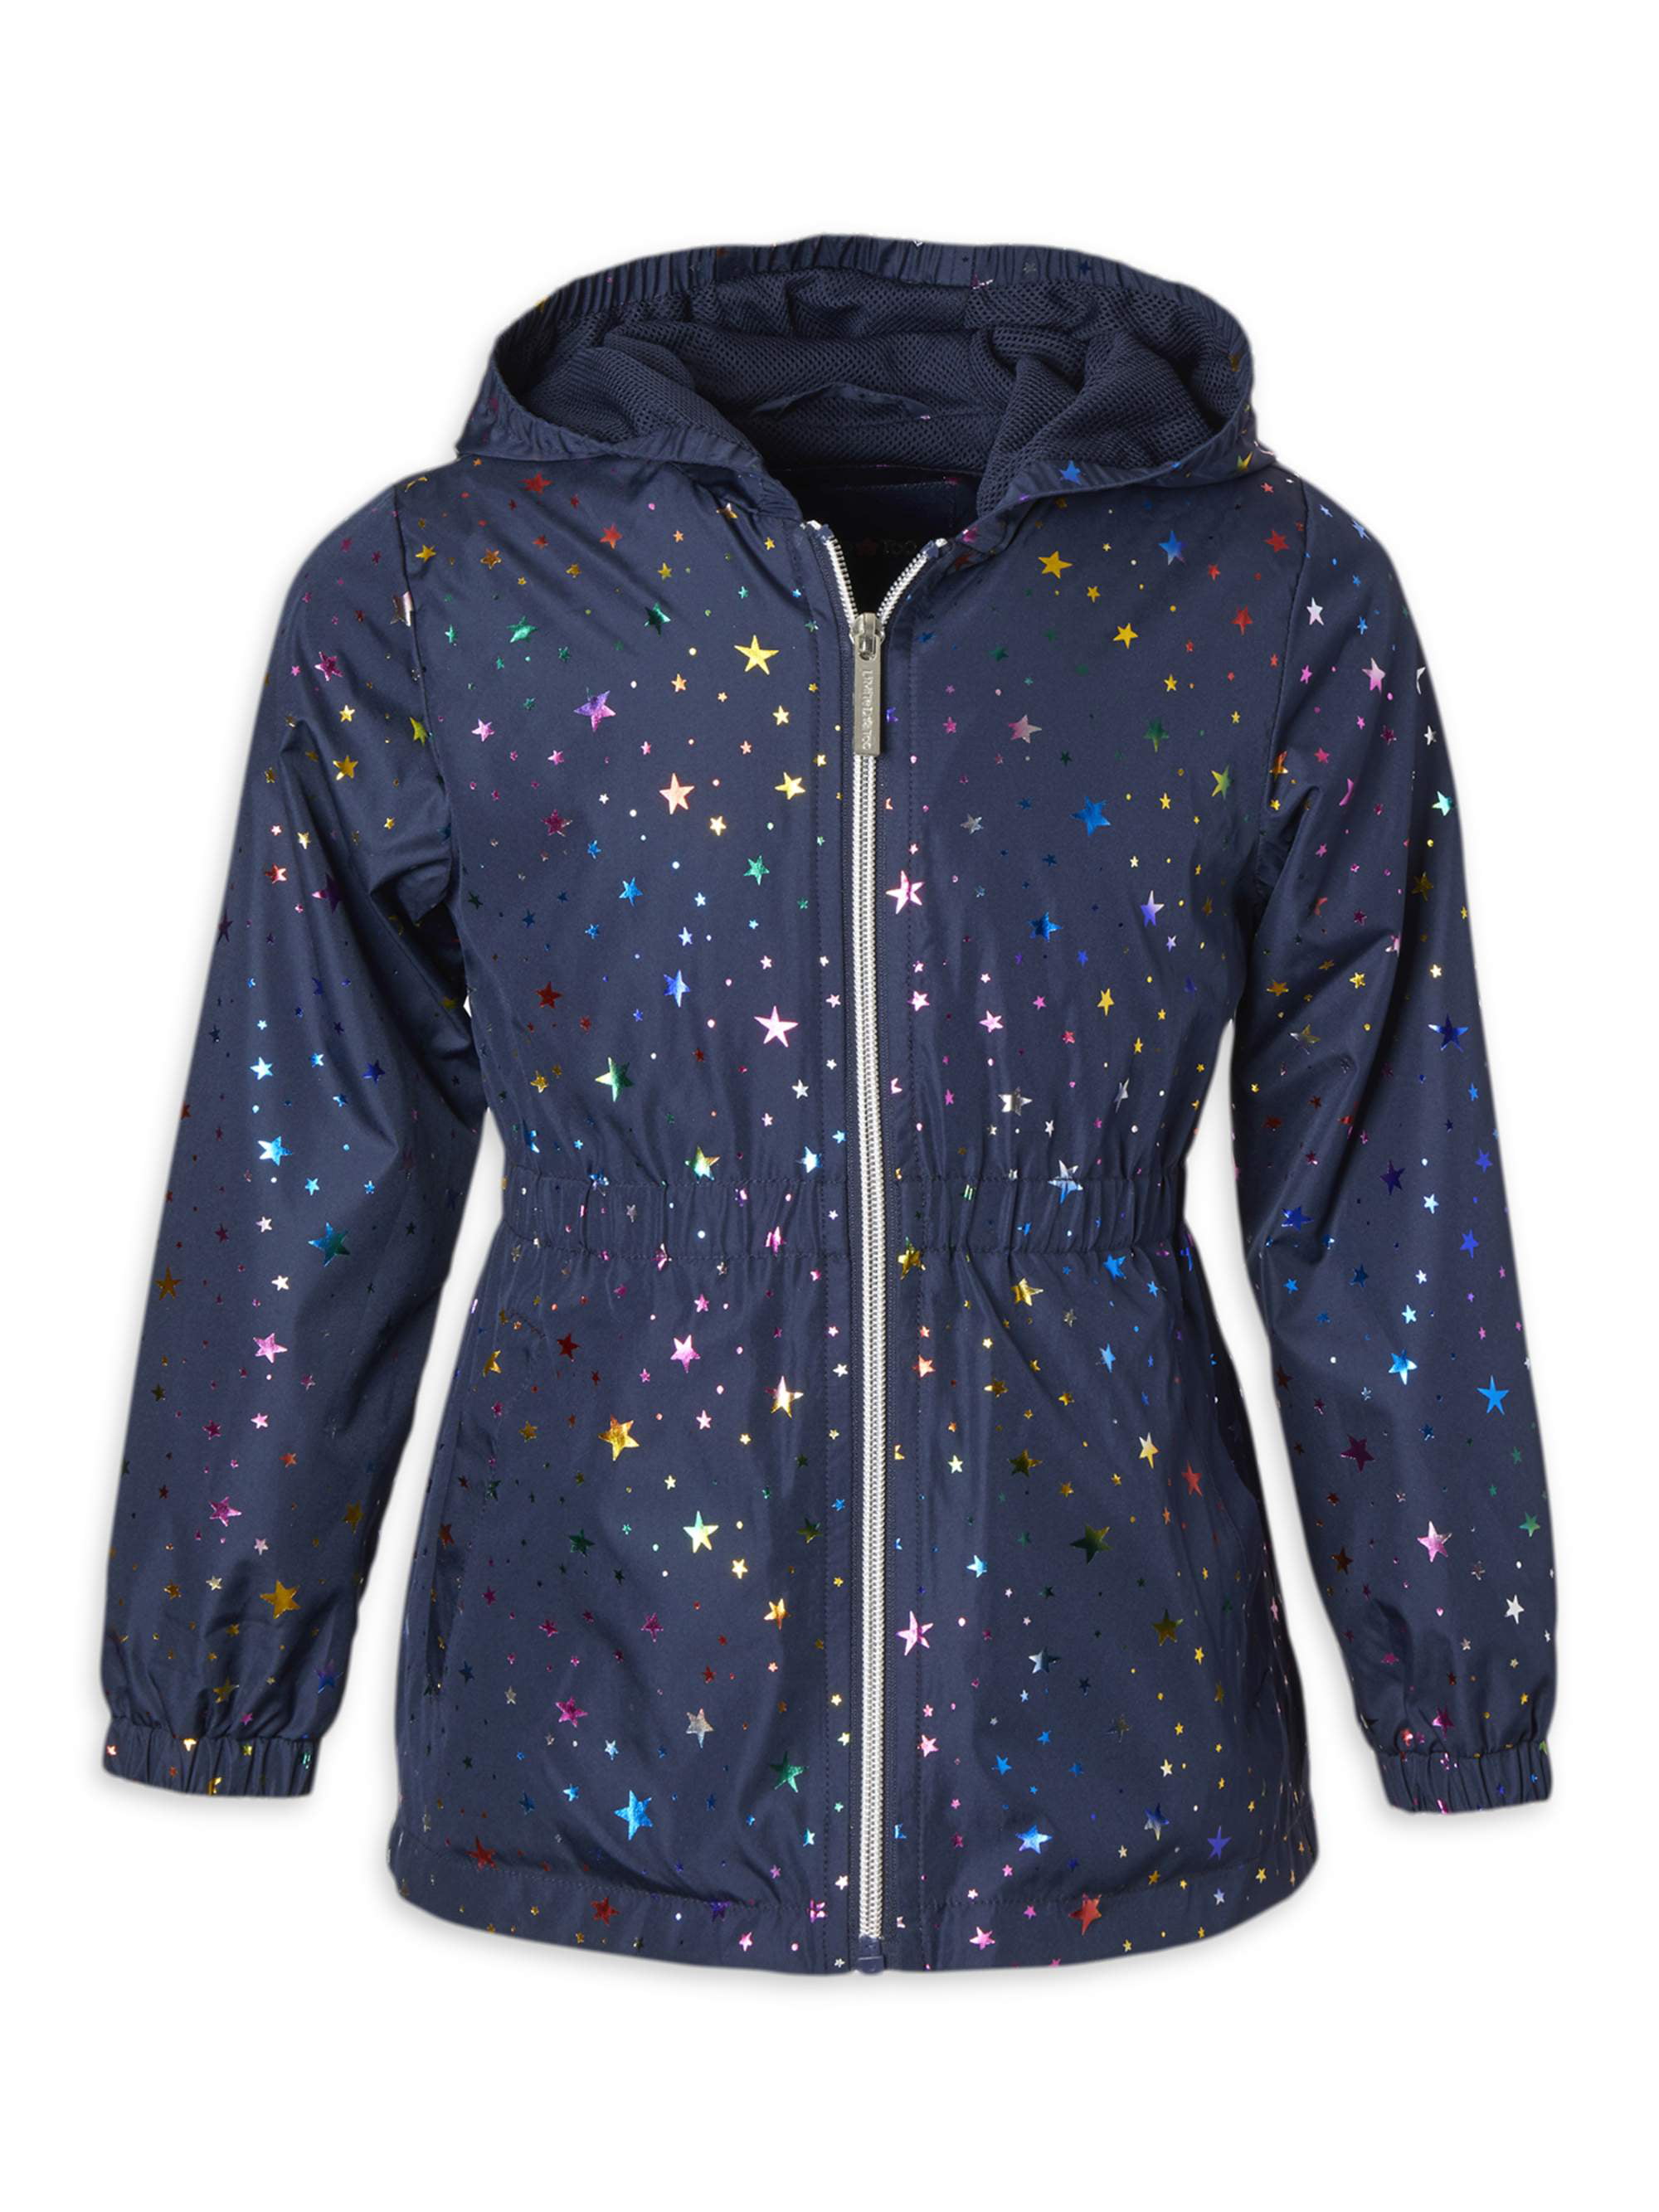 Limited Too Girls Jacket Lightweight Waterproof Anorak Raincoat with Hood and Cotton Lining